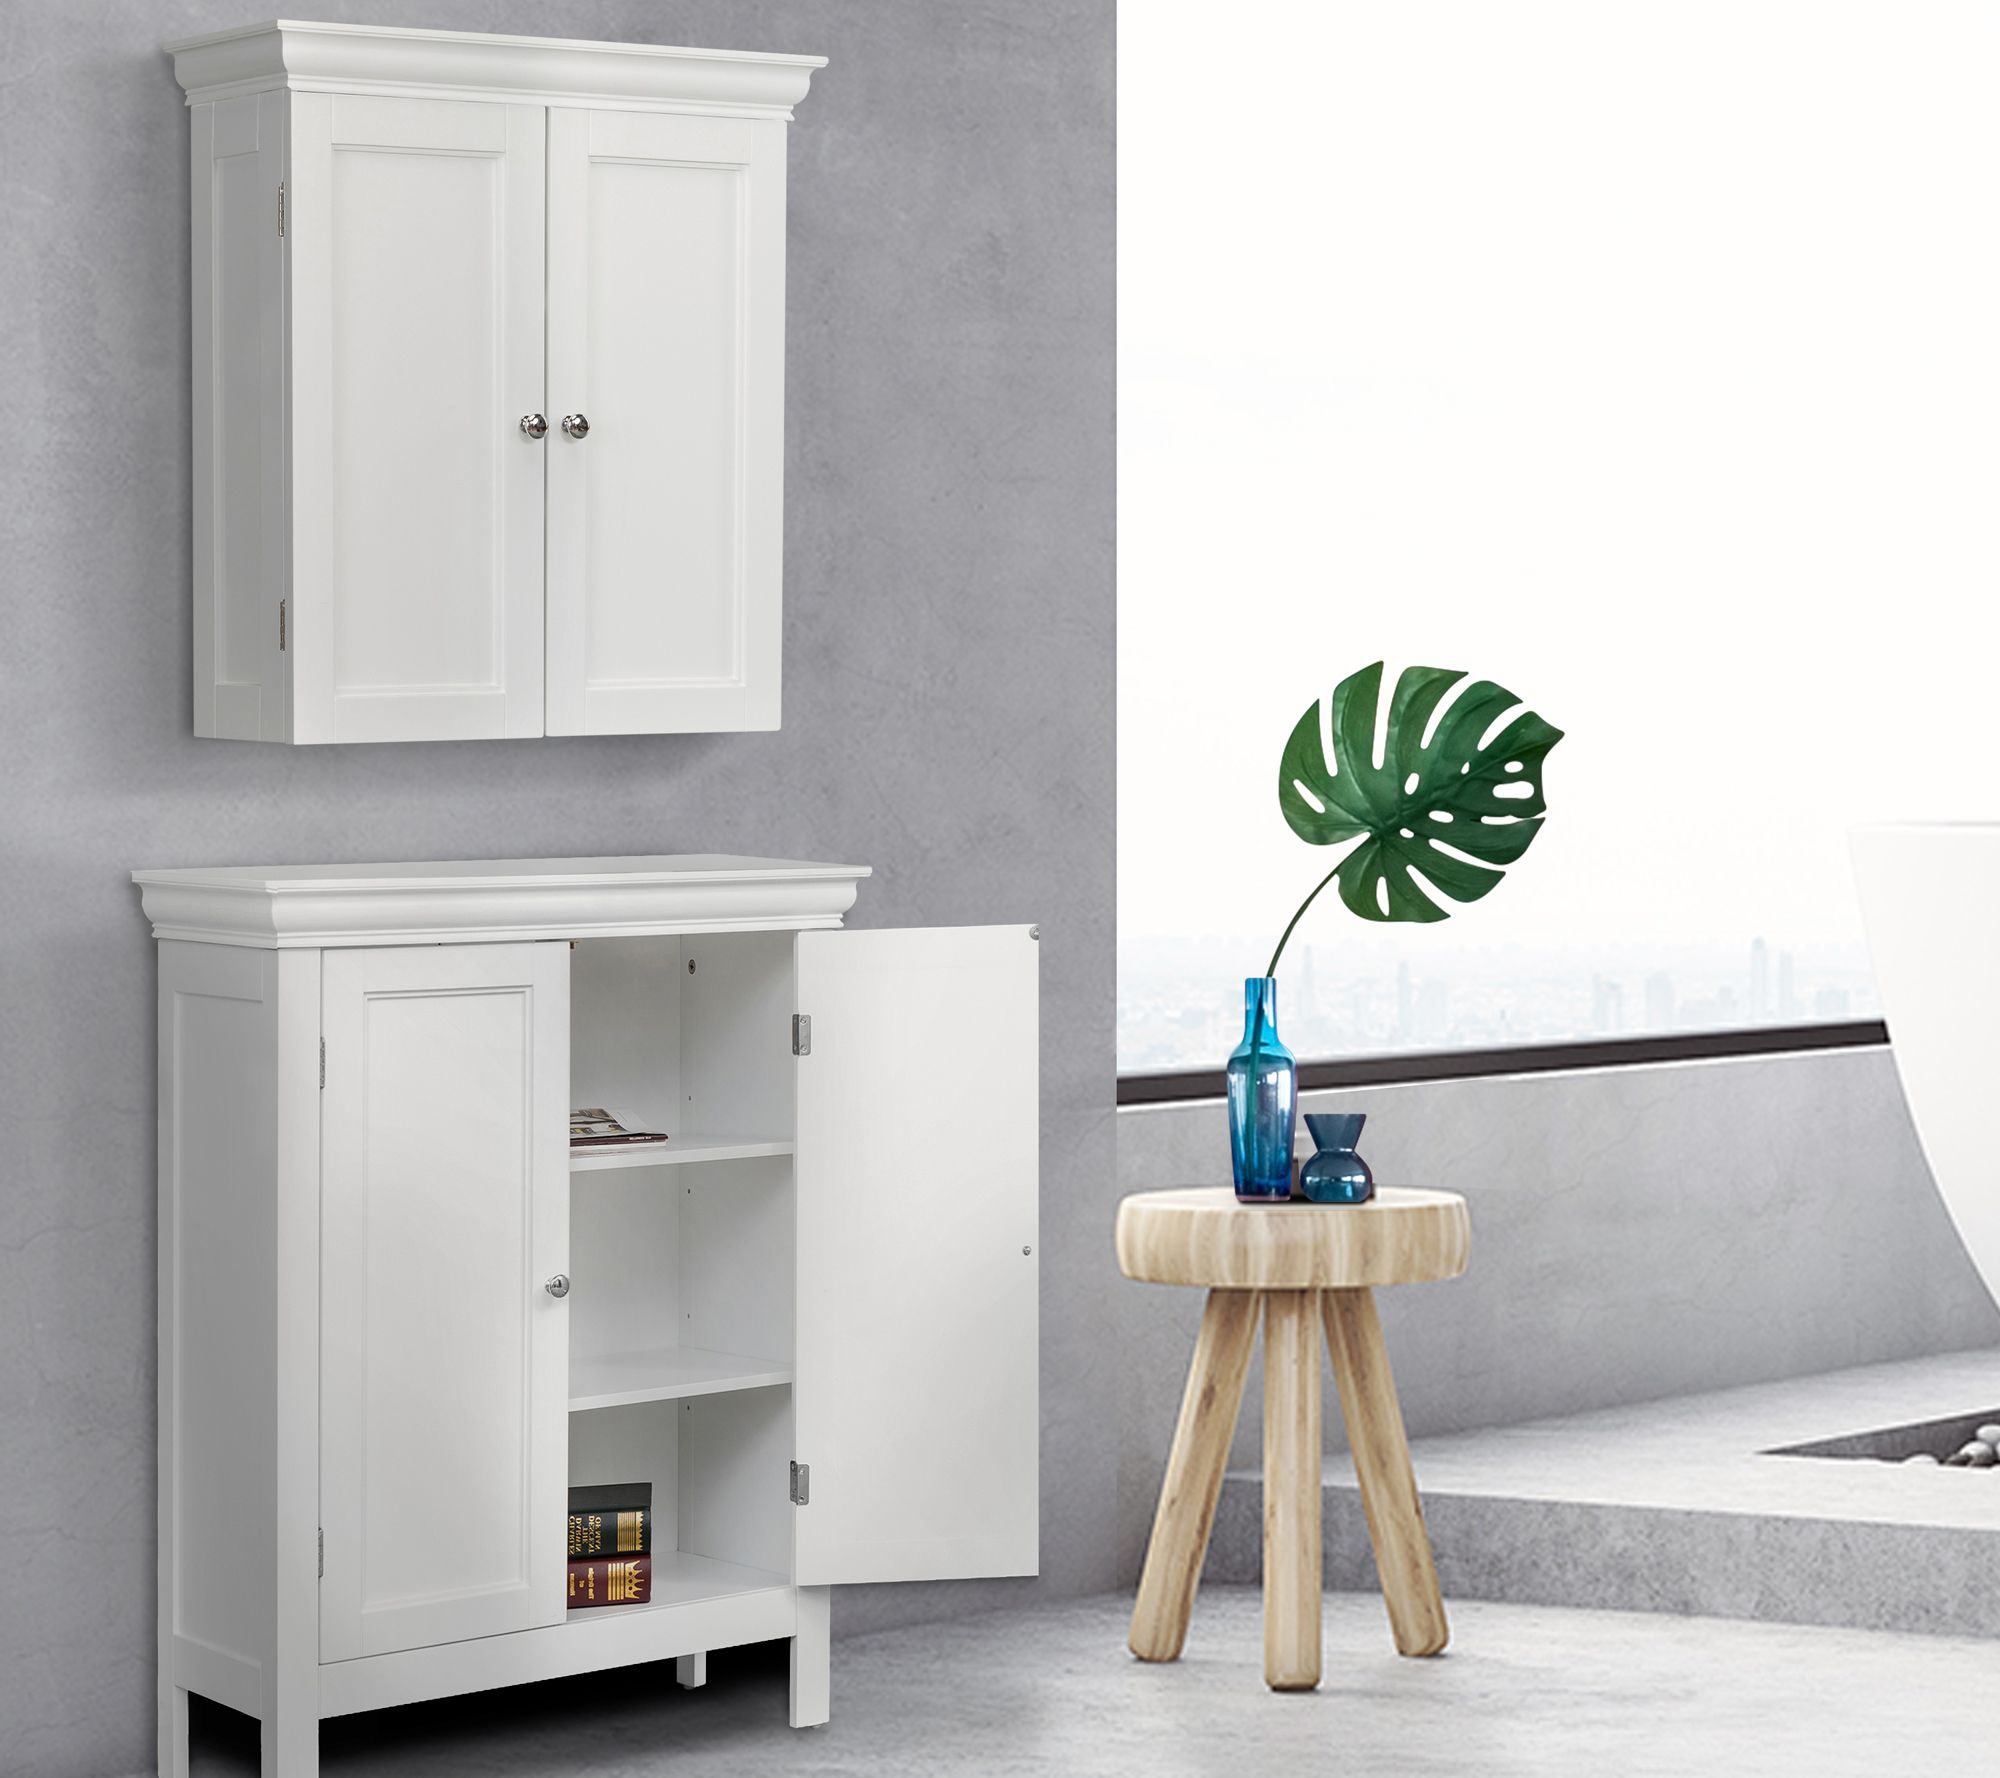 Stratford Removable Wall Cabinet with Two Doors